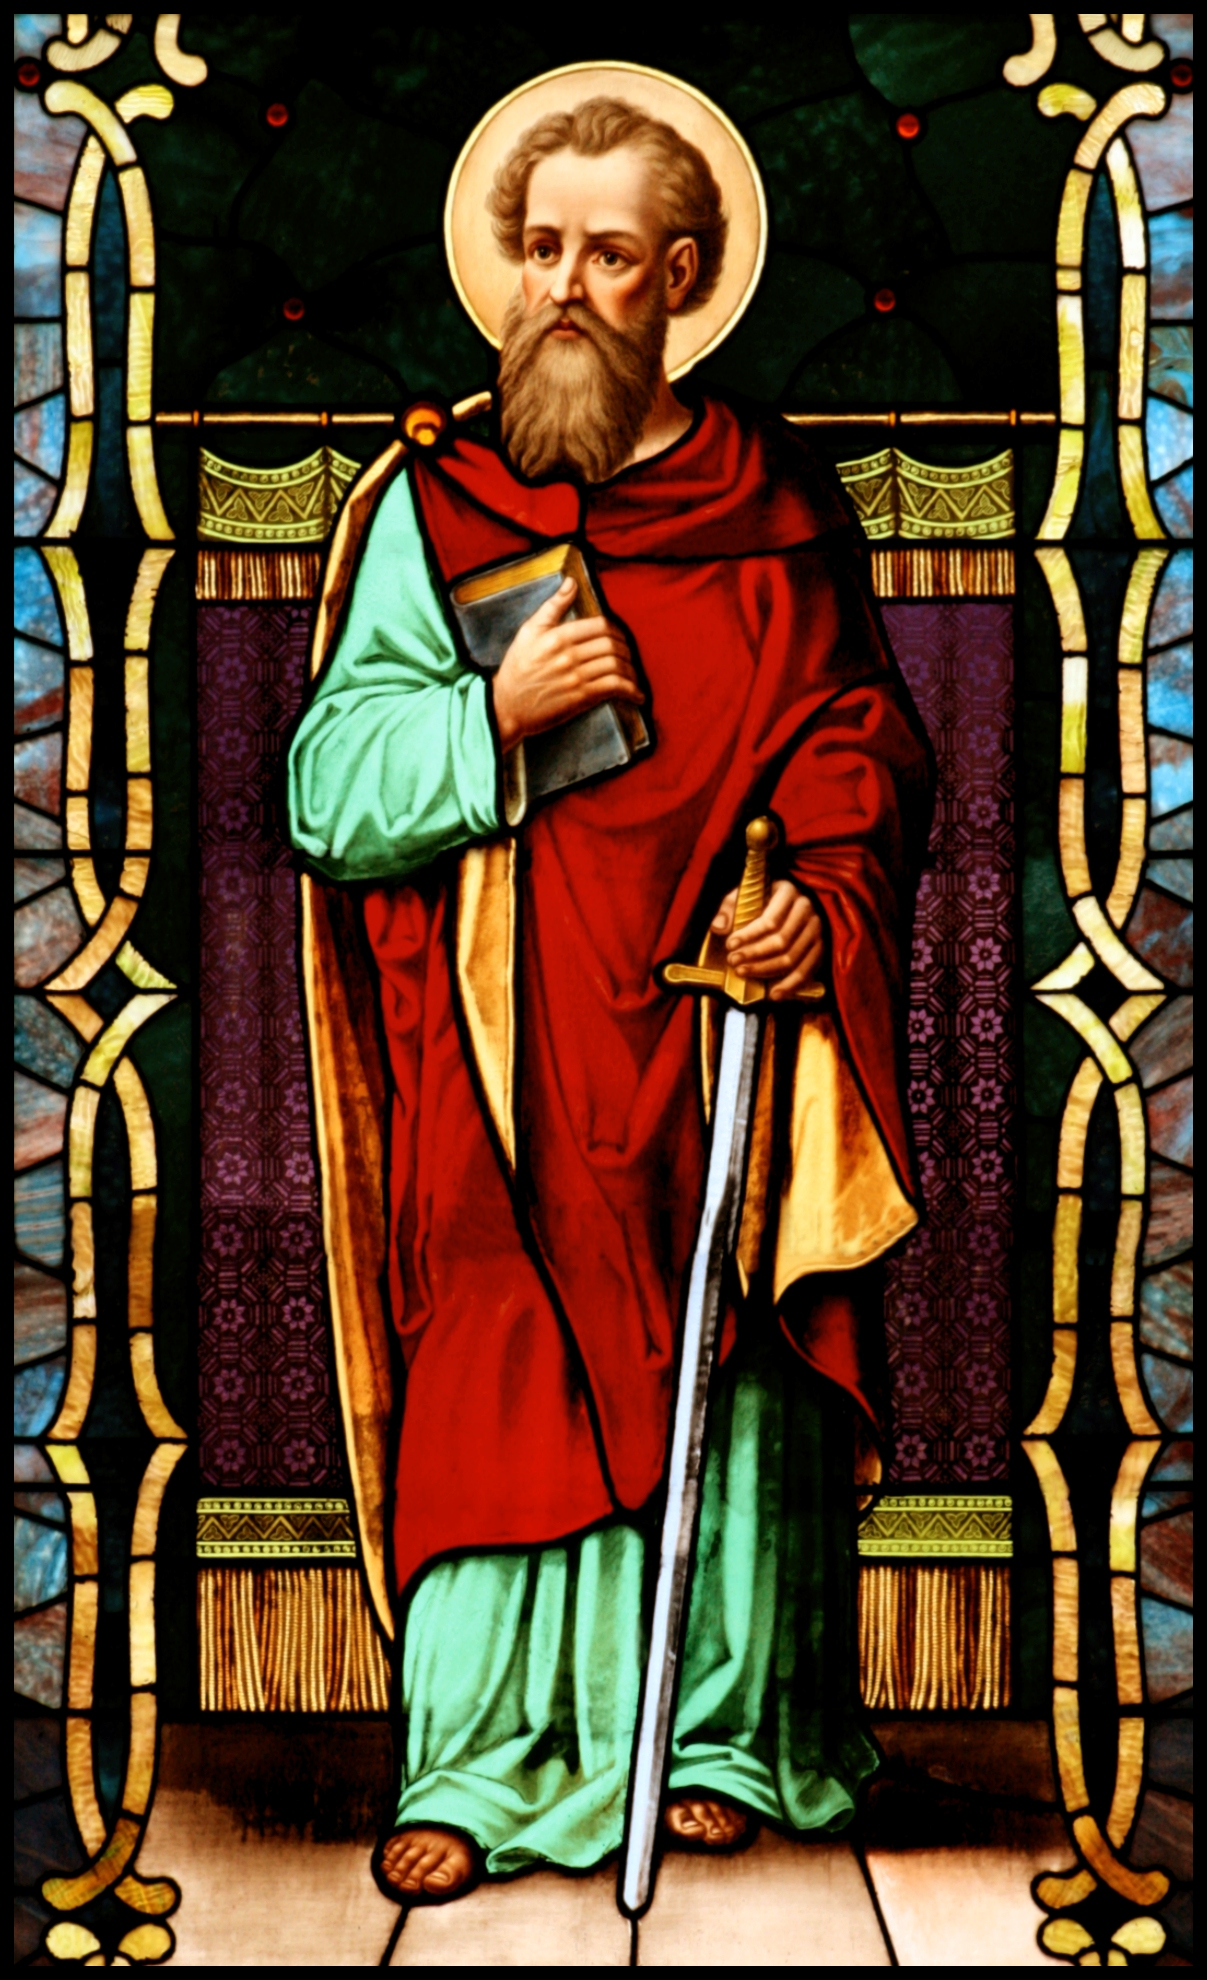 ST. PAUL IN STAINED GLASS